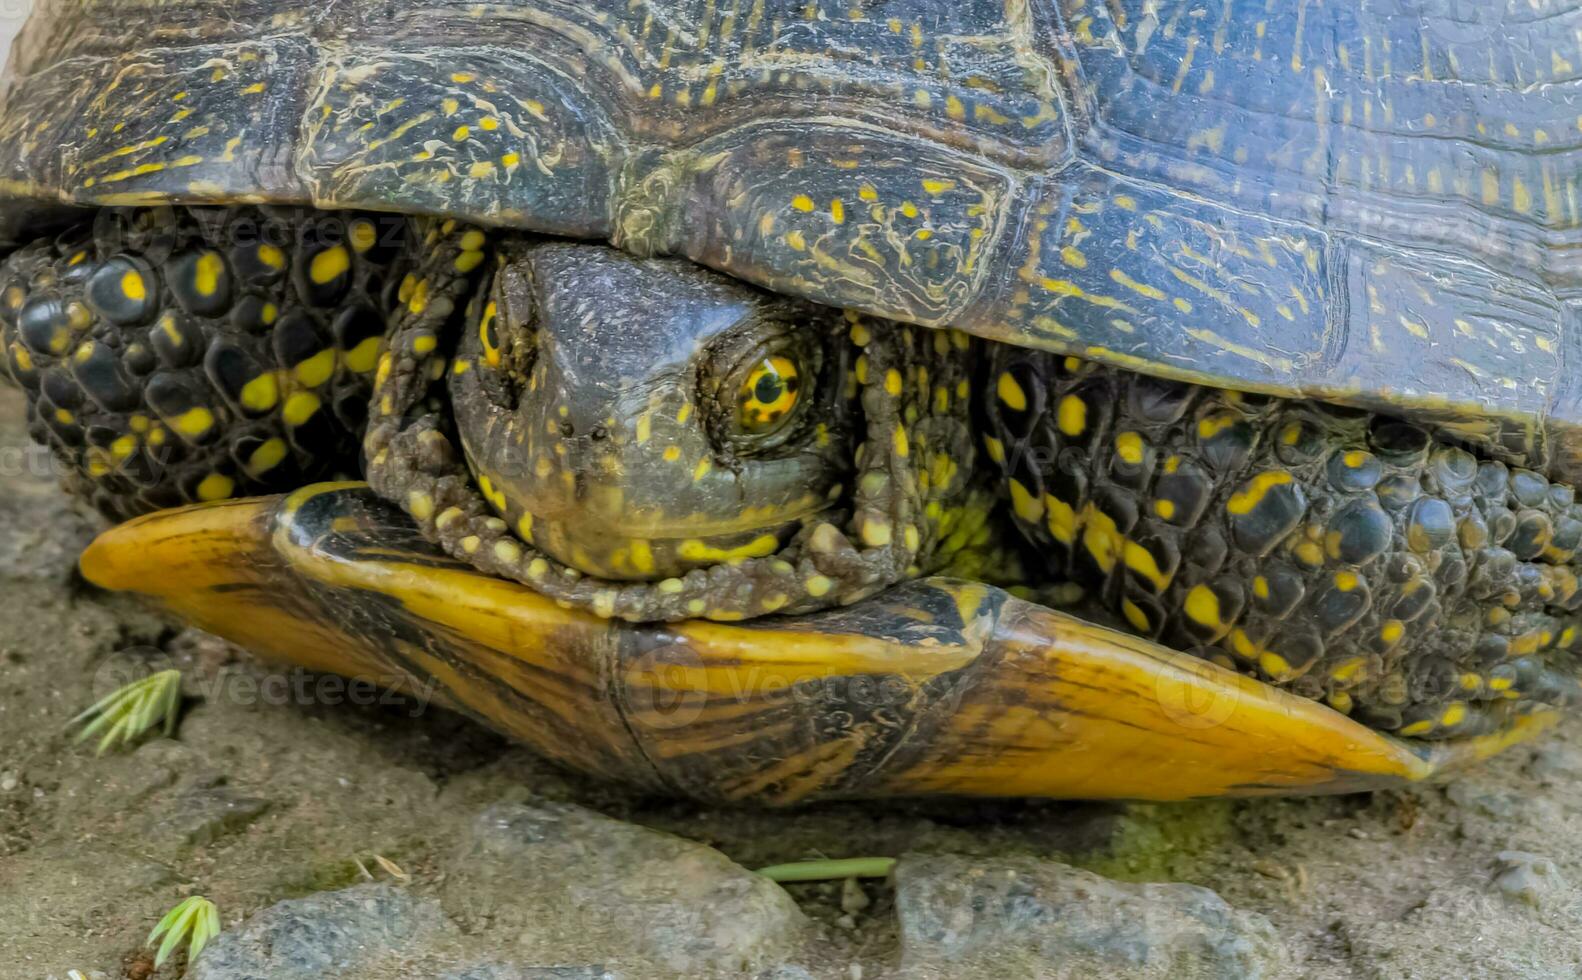 European pond turtle Emys orbicularis. Close-up of a river turtle basking in the sun. Summer, sunny day, close-up photo